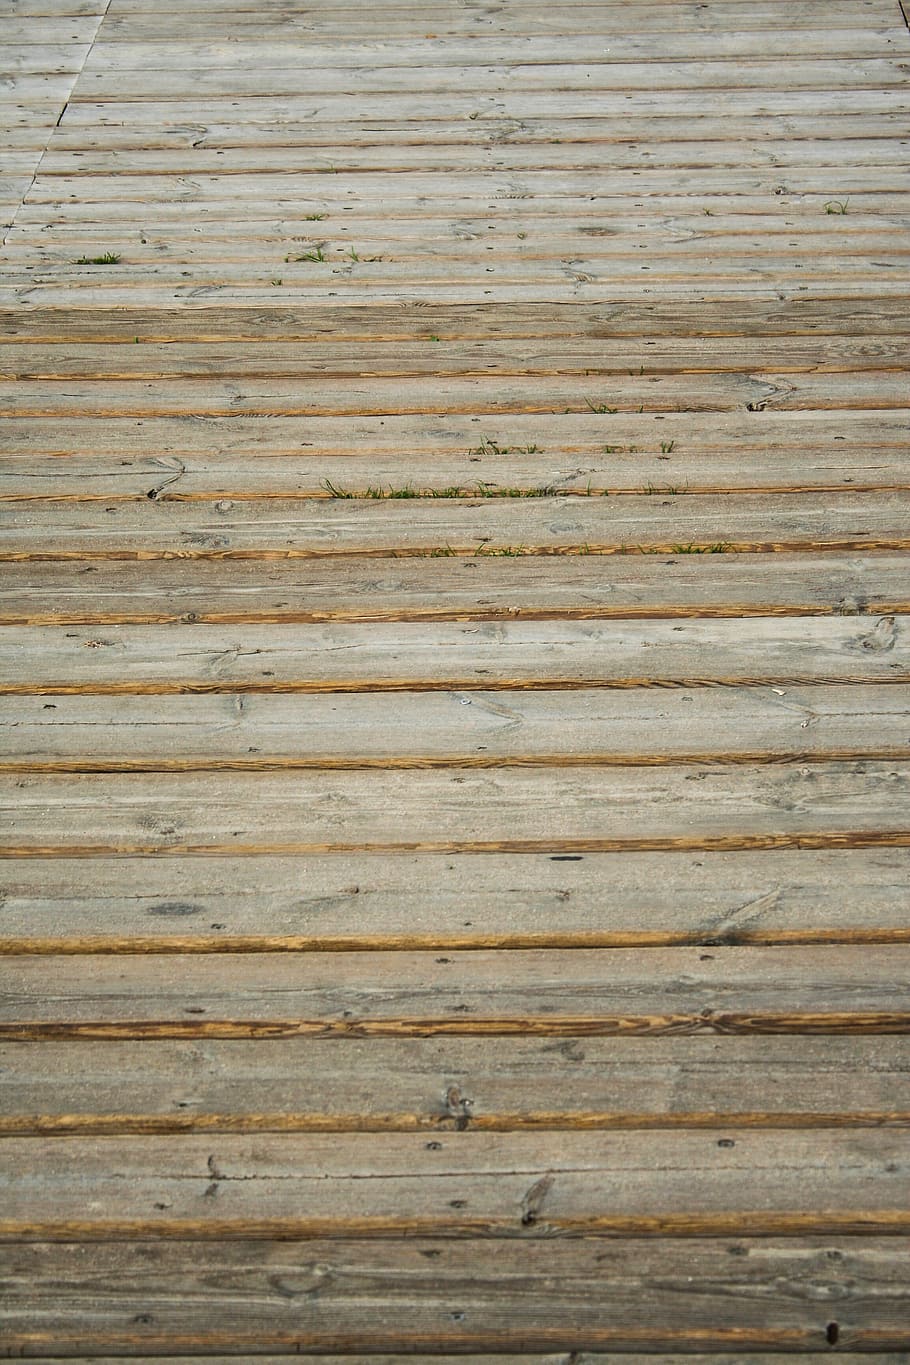 bridge, boards, wood, the path, texture, the background, board, wood - material, backgrounds, textured